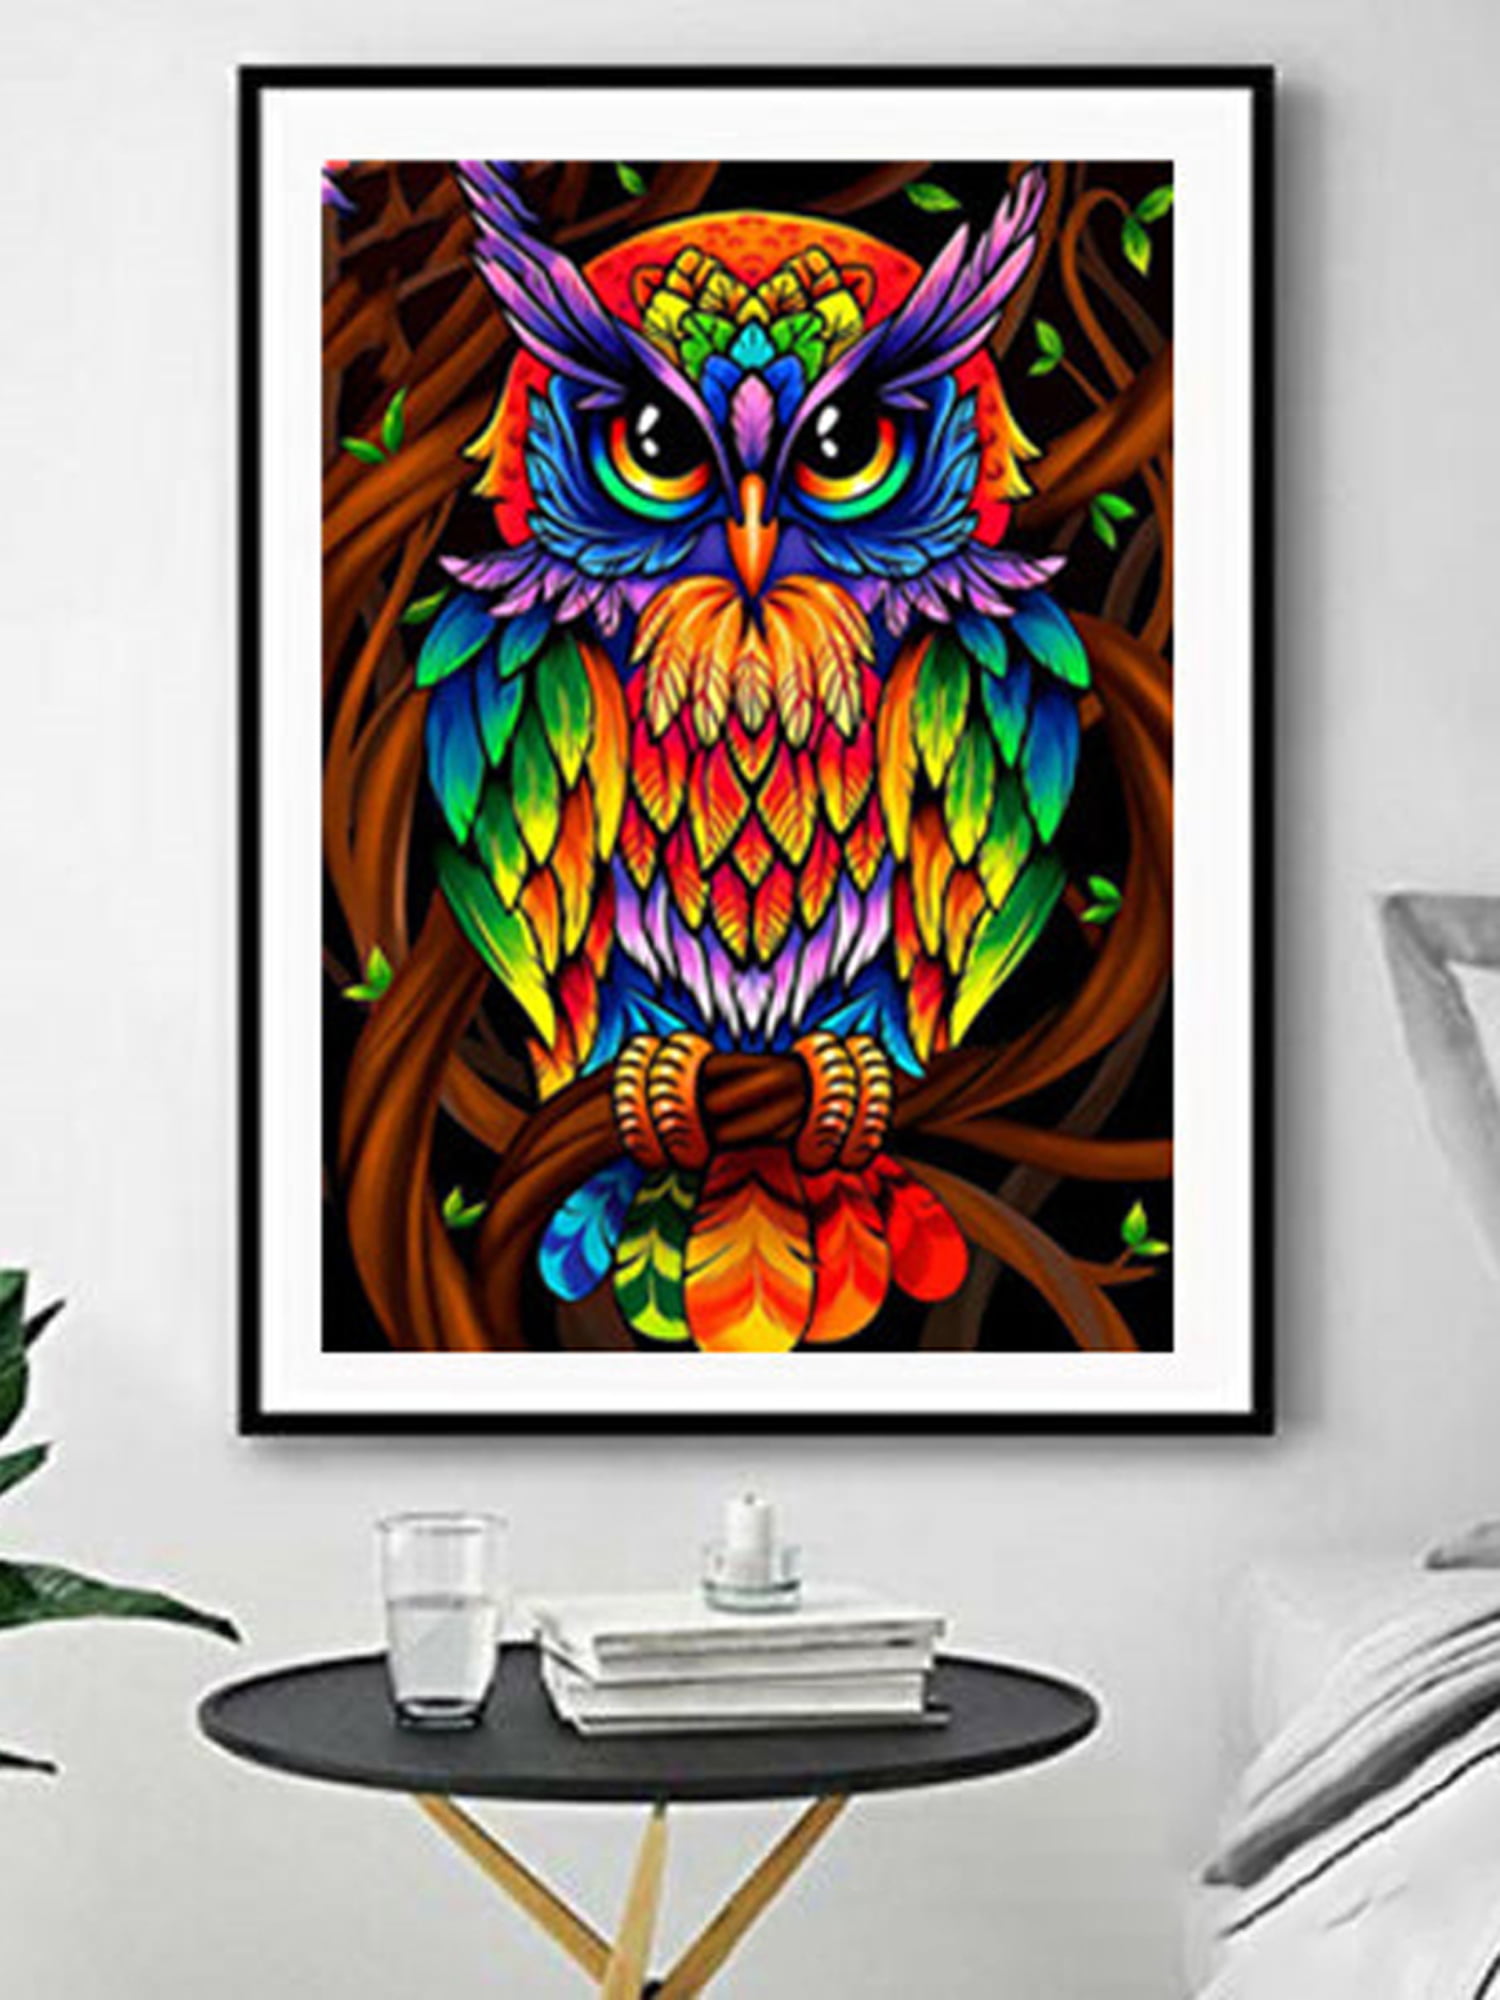 Owl Full Drill DIY 5D Diamond Painting Kit Art Embroidery Wall Decor Gift Crafts 